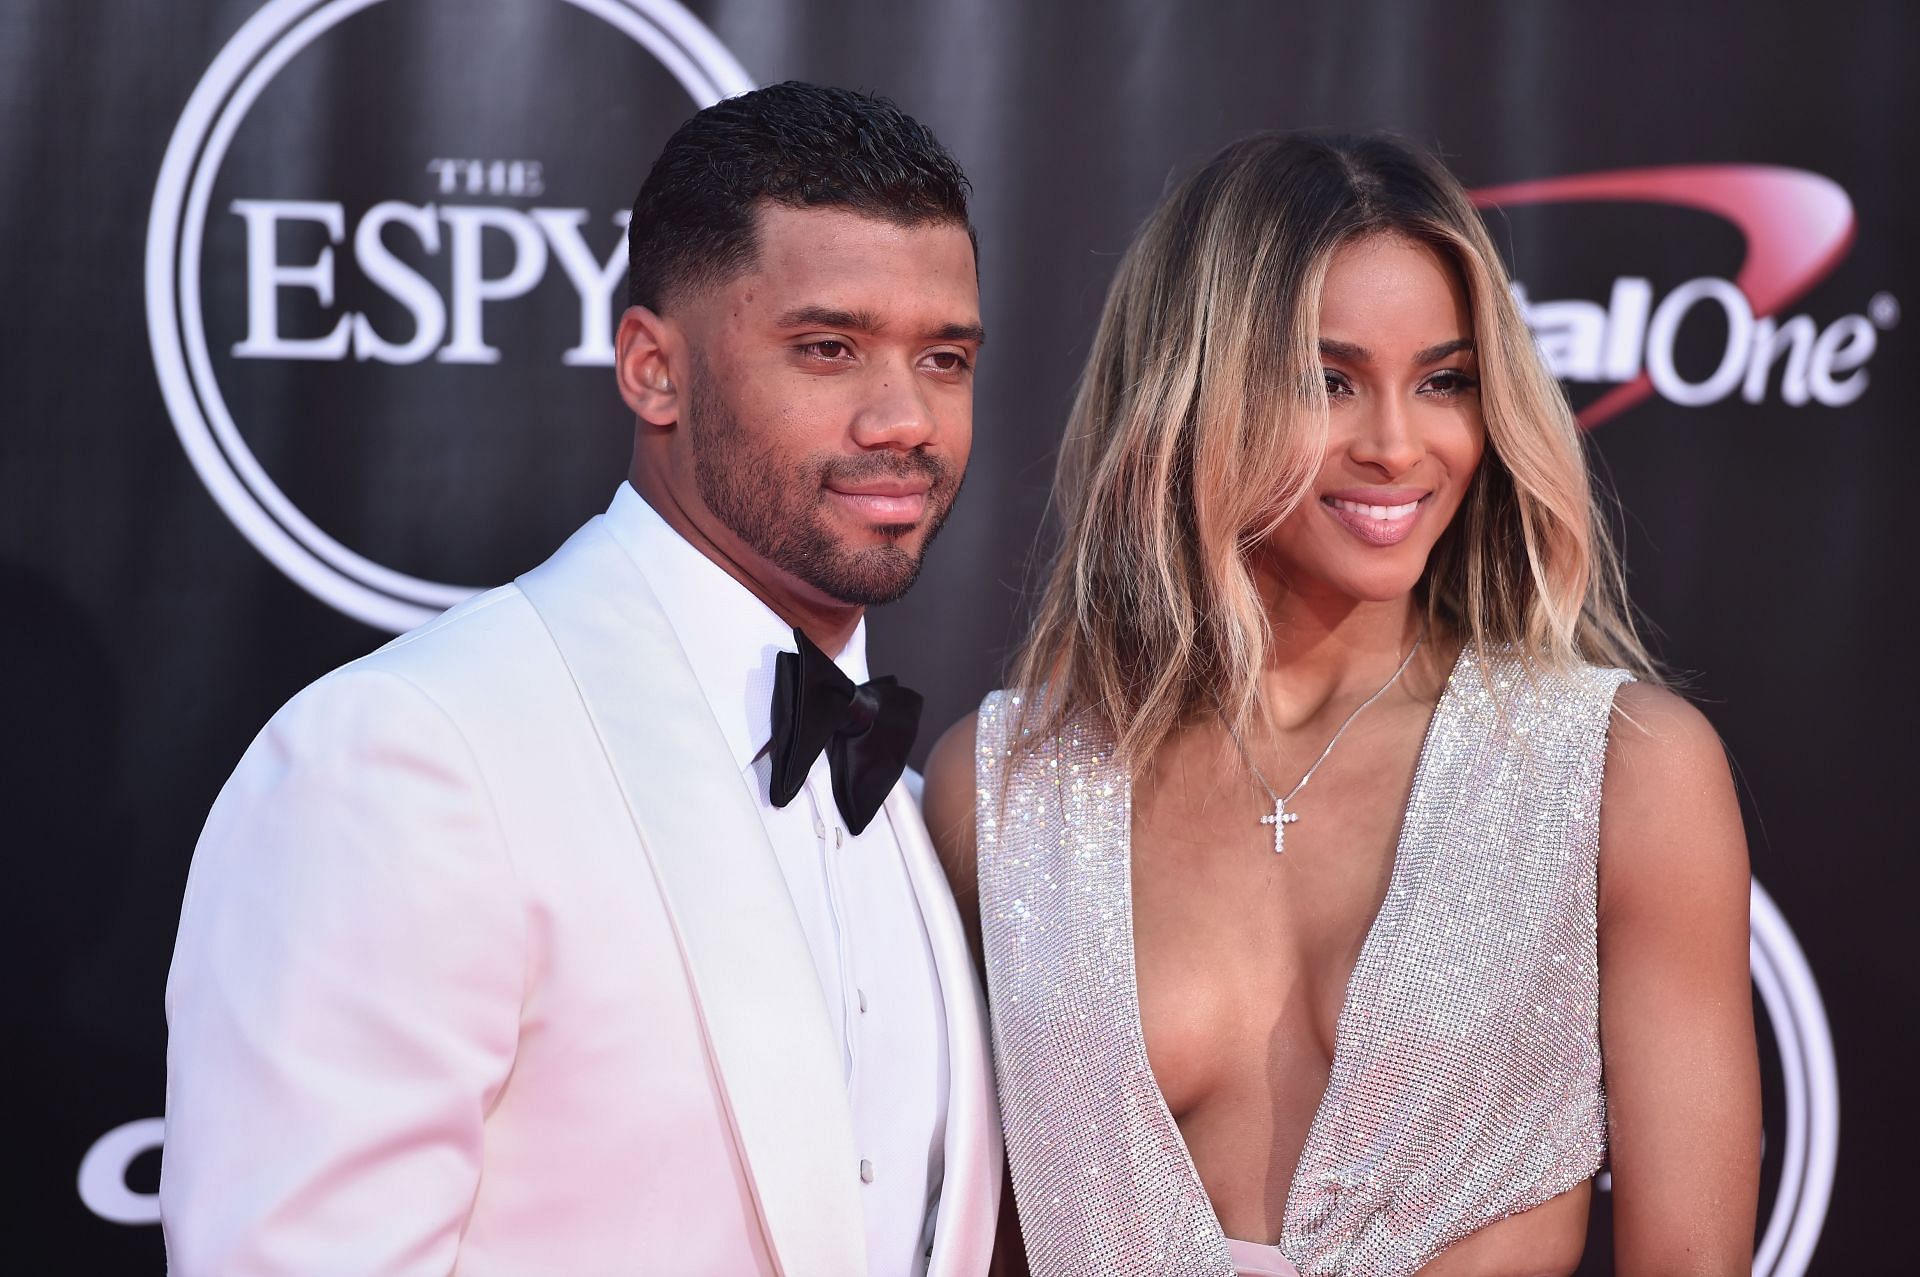 Russell Wilson and Ciara at the The 2016 ESPYS